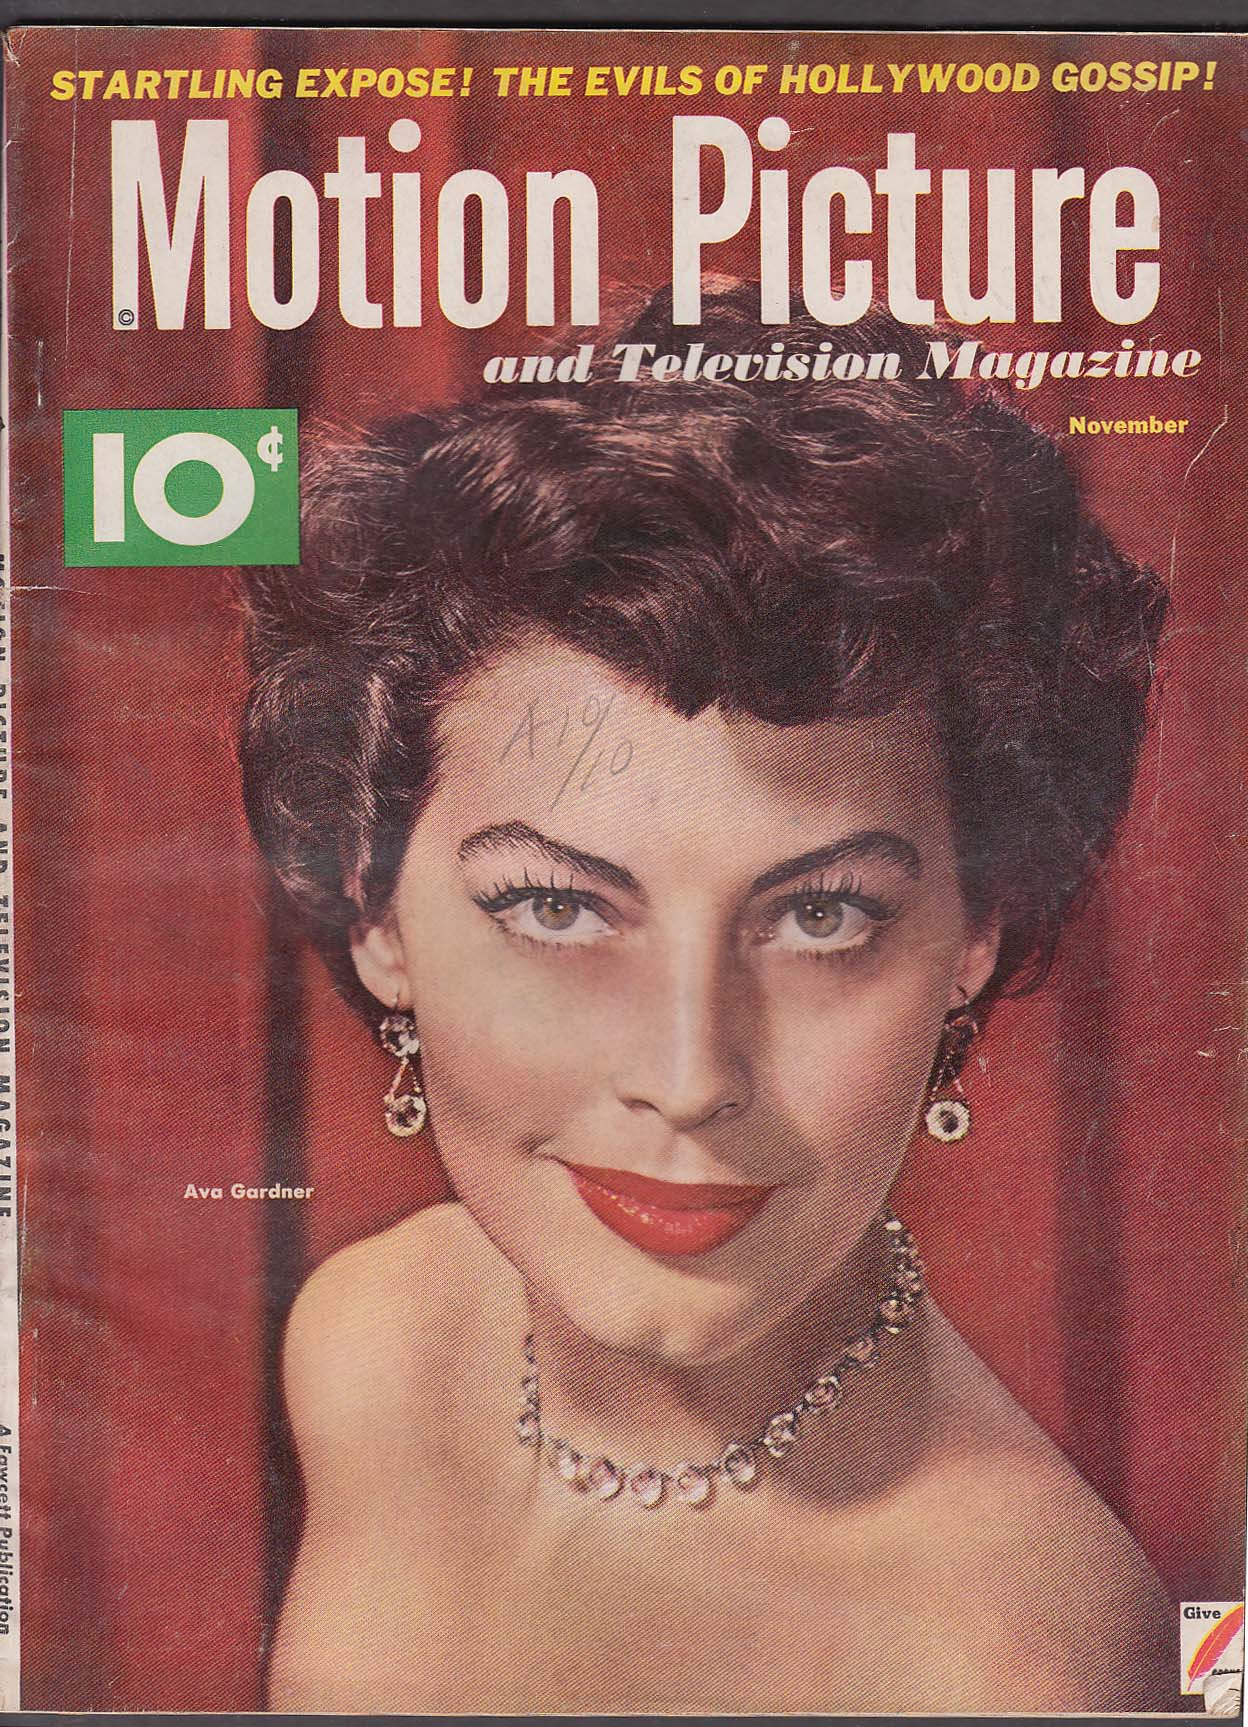 motion-picture-ava-gardner-audie-murphy-janet-leigh-frank-sinatra-11